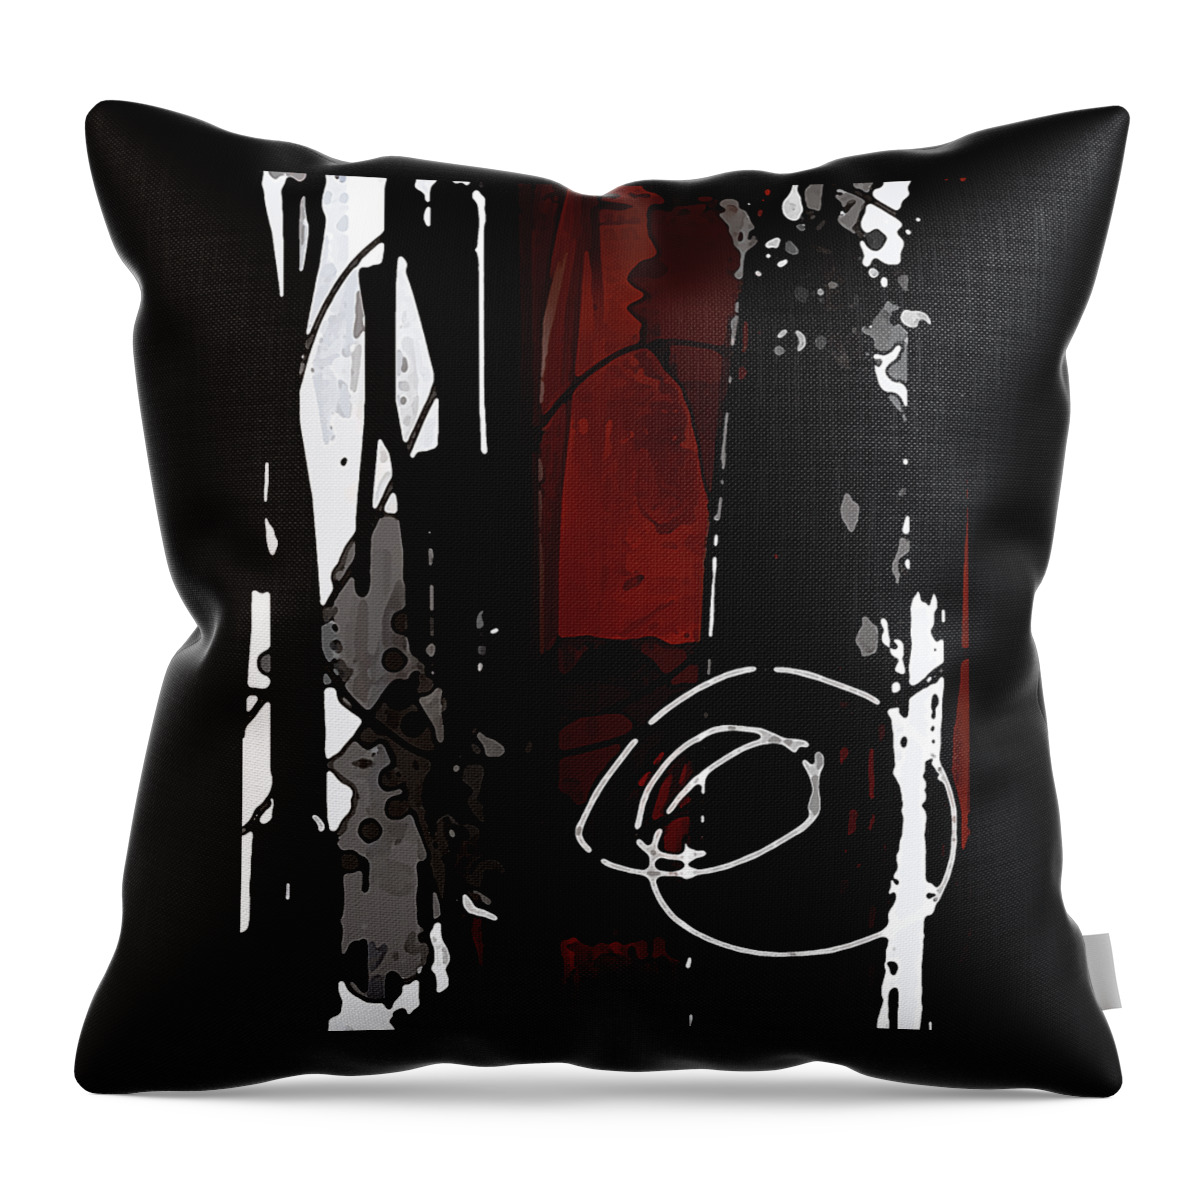 Abstract Painting Digital Image Throw Pillow featuring the digital art Parallels - Modern Abstract Digital Art by Patricia Awapara